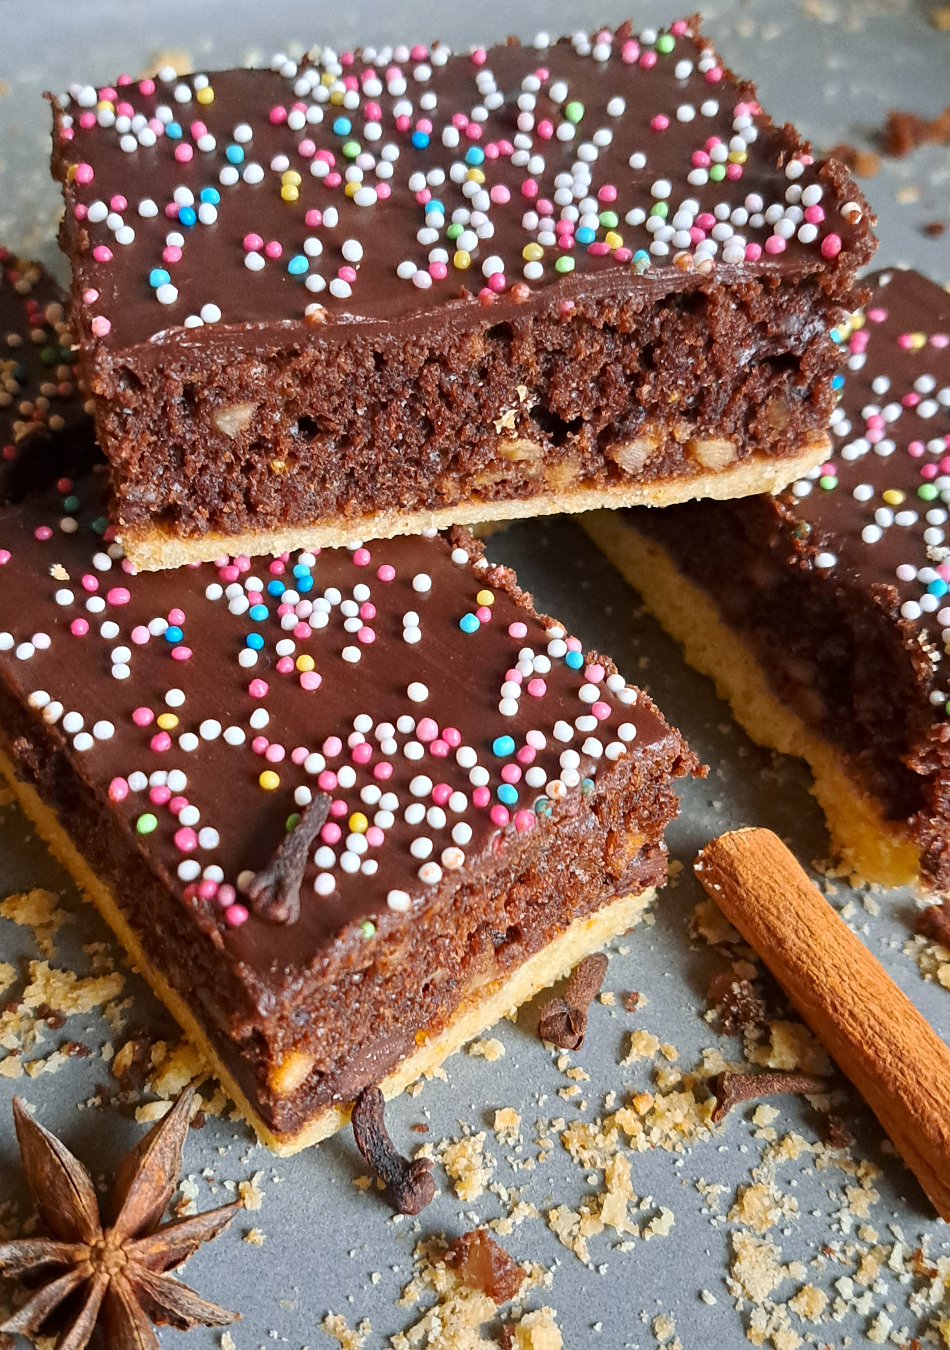 A visually appealing photograph featuring slices of German chocolate spice cake arranged in neat stacks, resembling gingerbread cake bars. The slices showcase a rich, moist texture and are garnished with whole spices such as star anise, cloves, and a cinnamon stick placed artfully beside them. The warm and inviting tones of the cake, coupled with the aromatic spices, create an enticing scene that captures the essence of traditional Gewürzkuchen.